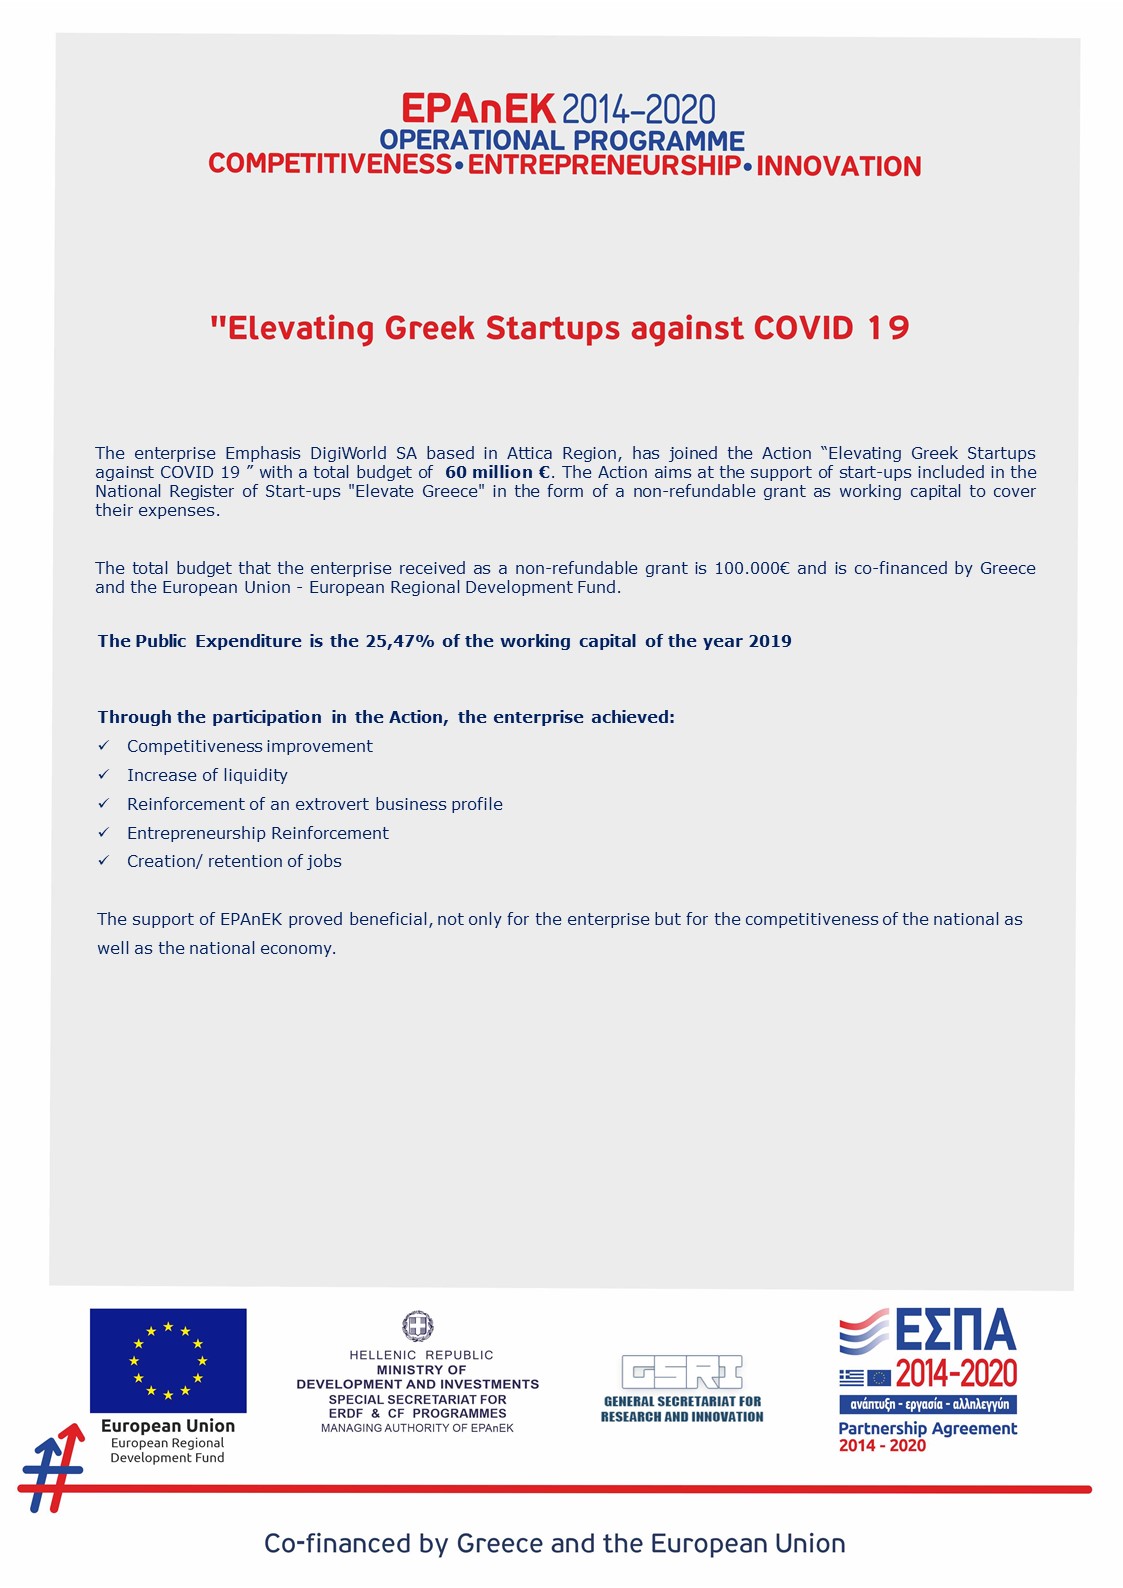 Emphasis DigiWorld has joined the Action “Elevating Greek Startups against COVID 19 ”